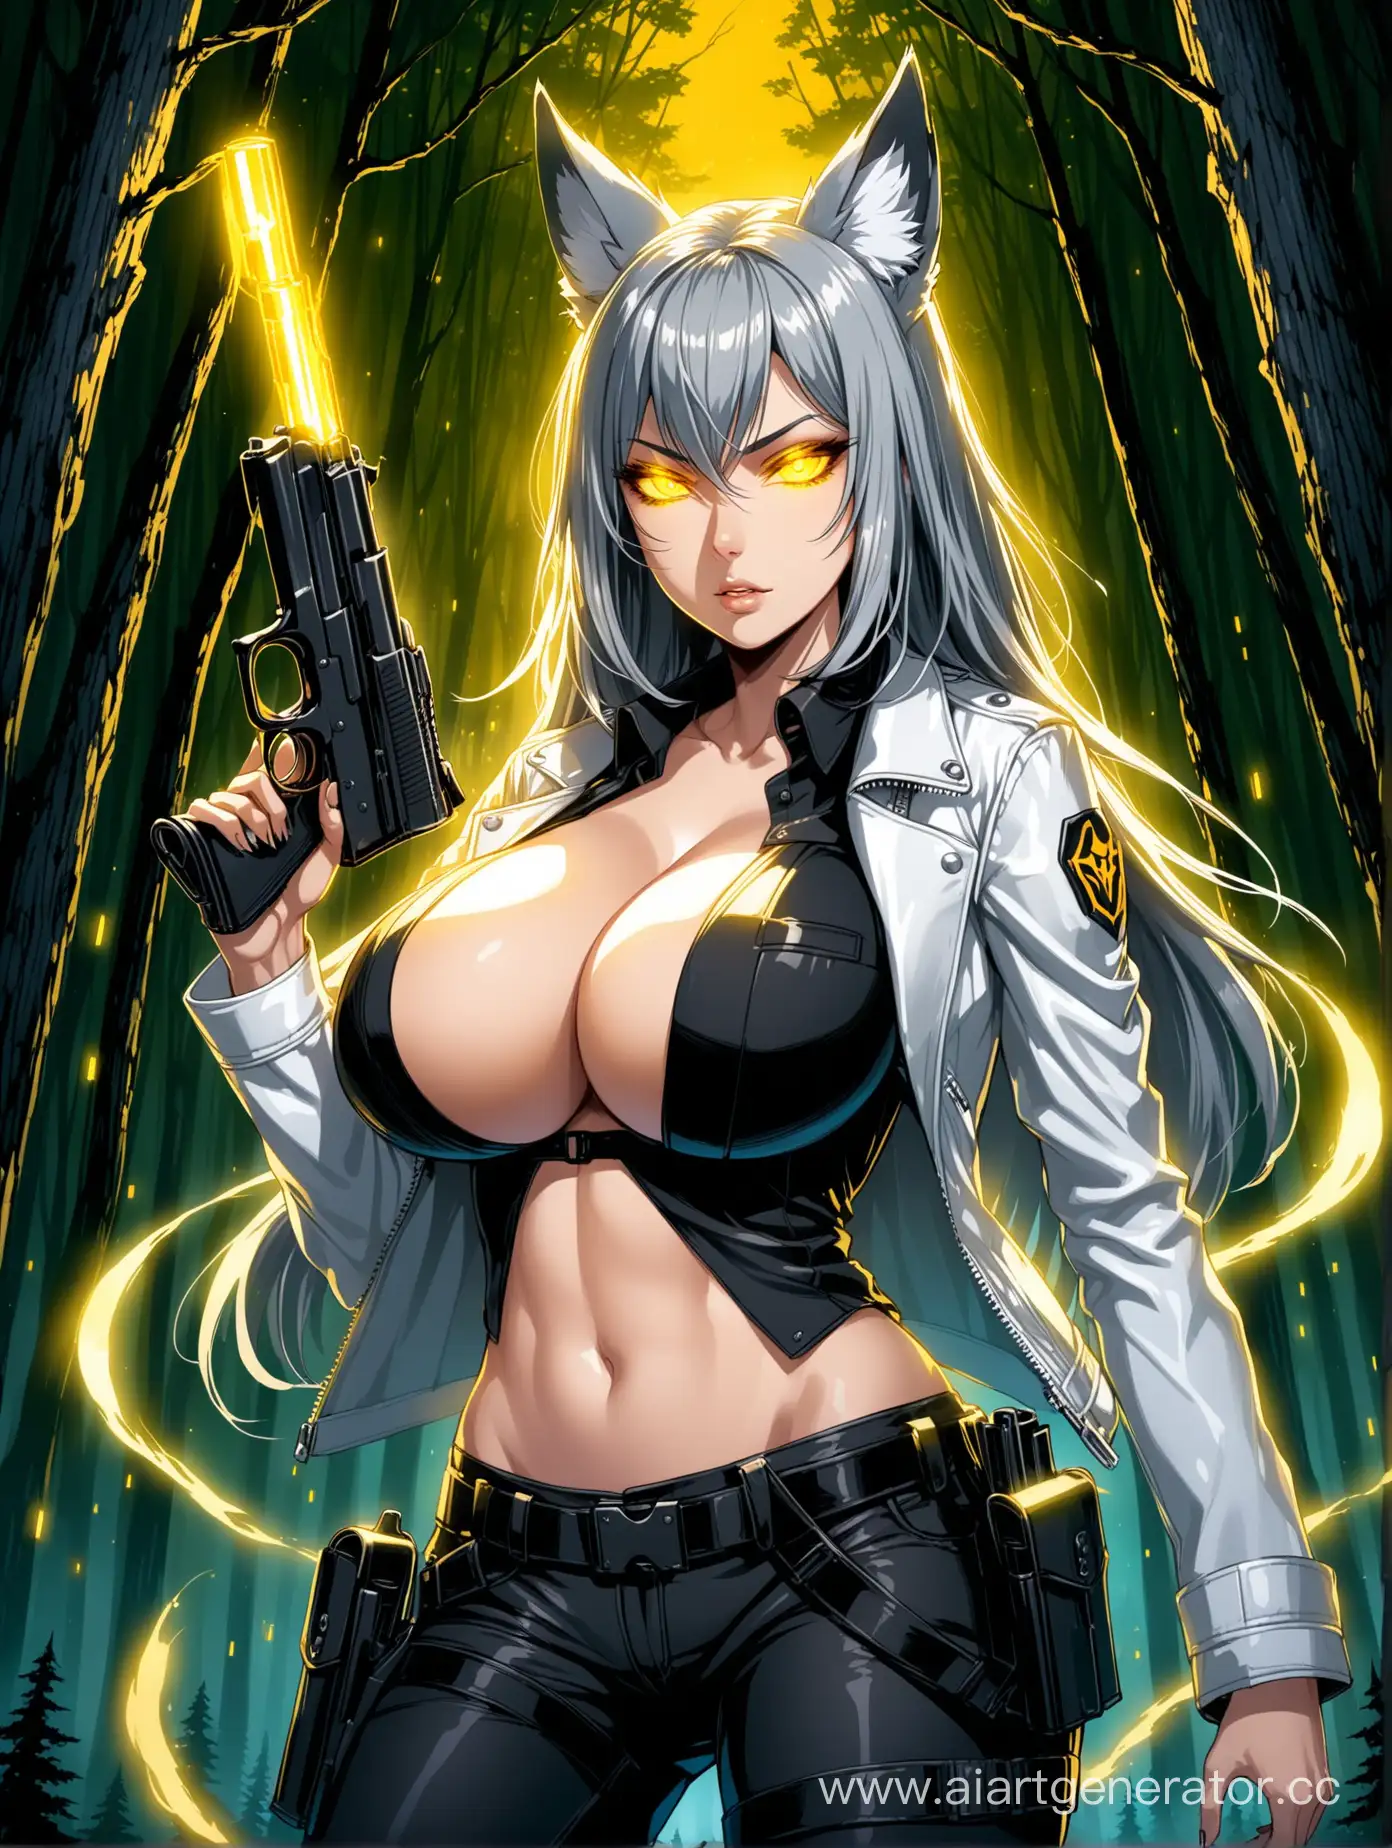 Fierce-White-FoxEared-Girl-in-Leather-Jacket-with-Guns-in-Night-Forest